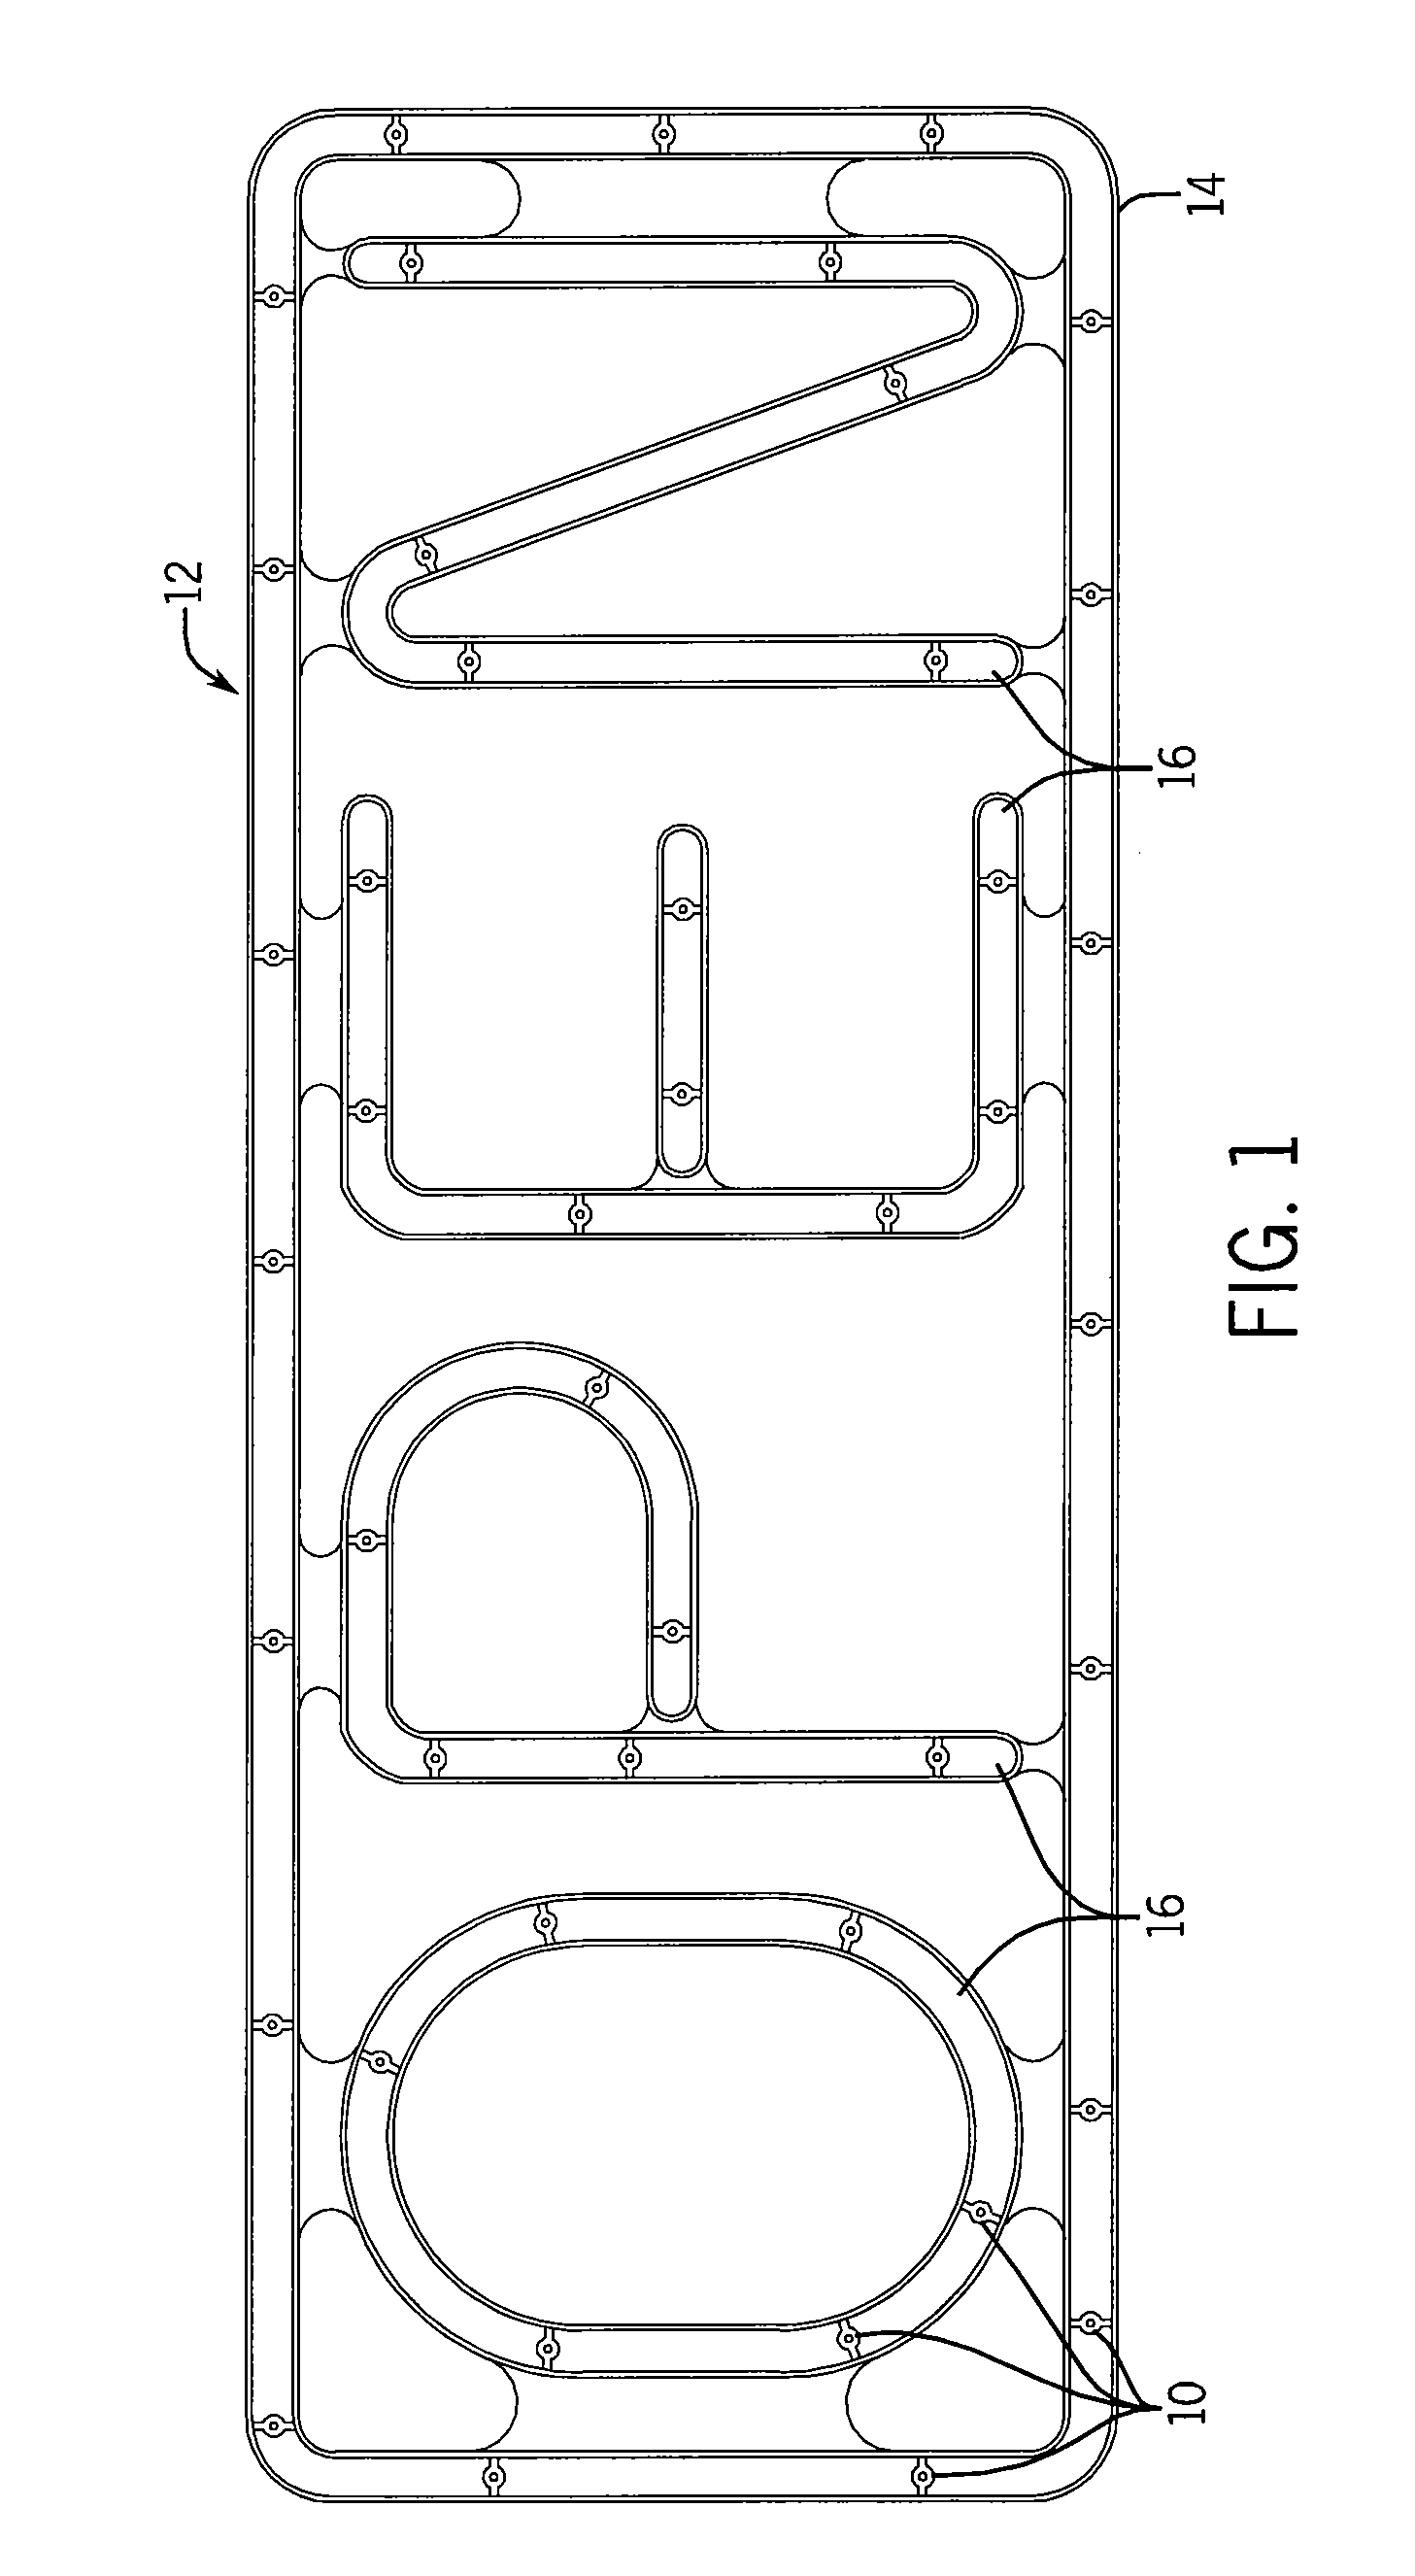 Reinforced housing structure for a lighted sign or lighting fixture